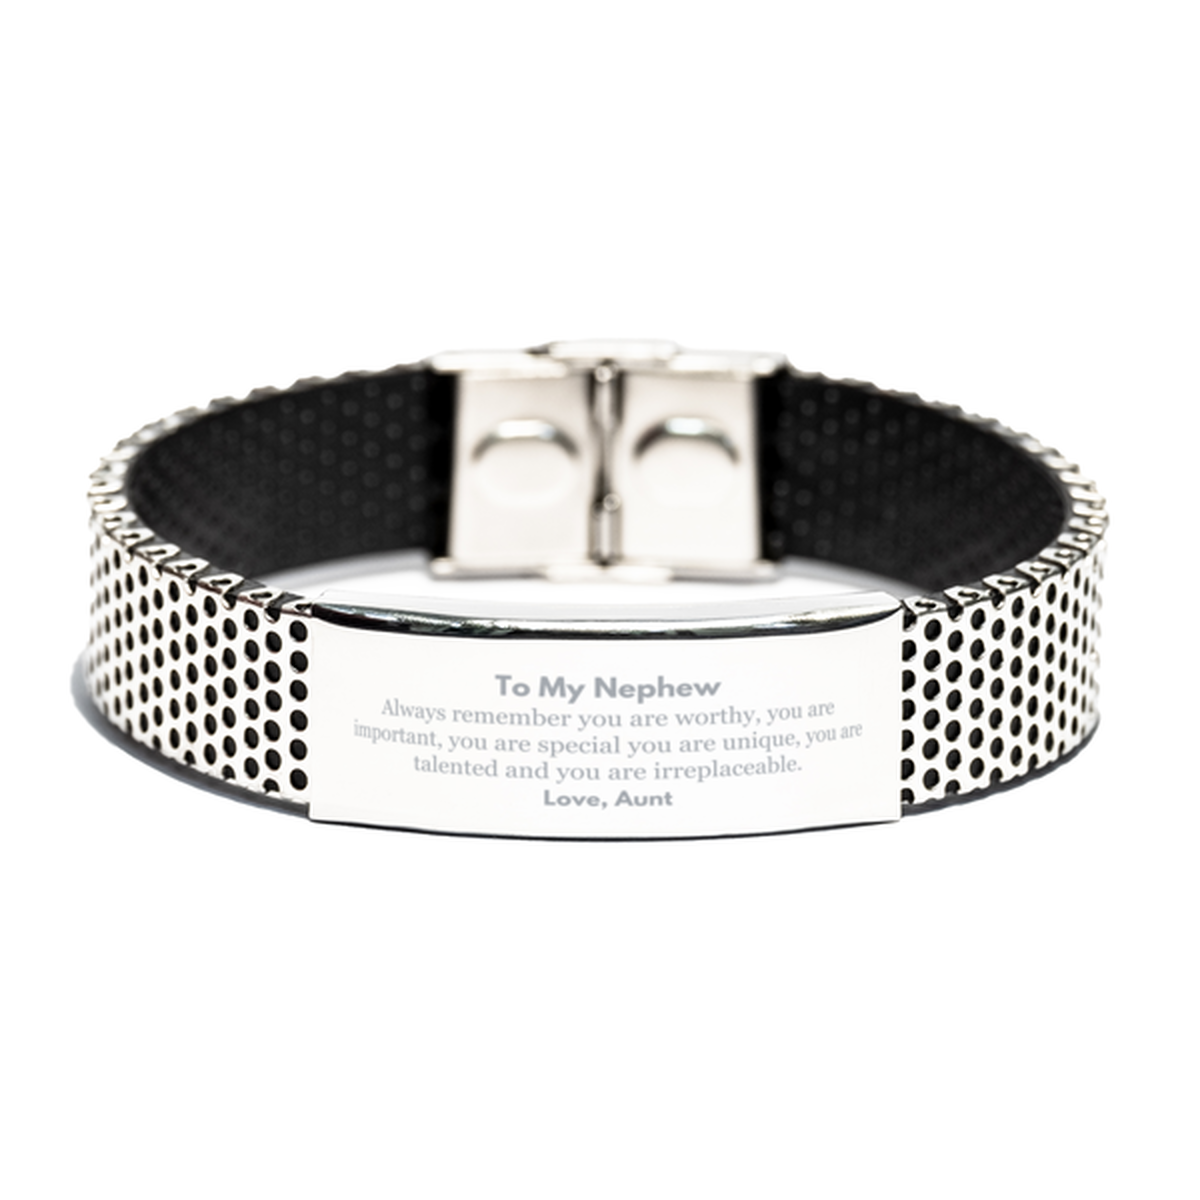 Nephew Birthday Gifts from Aunt, Inspirational Stainless Steel Bracelet for Nephew Christmas Graduation Gifts for Nephew Always remember you are worthy, you are important. Love, Aunt